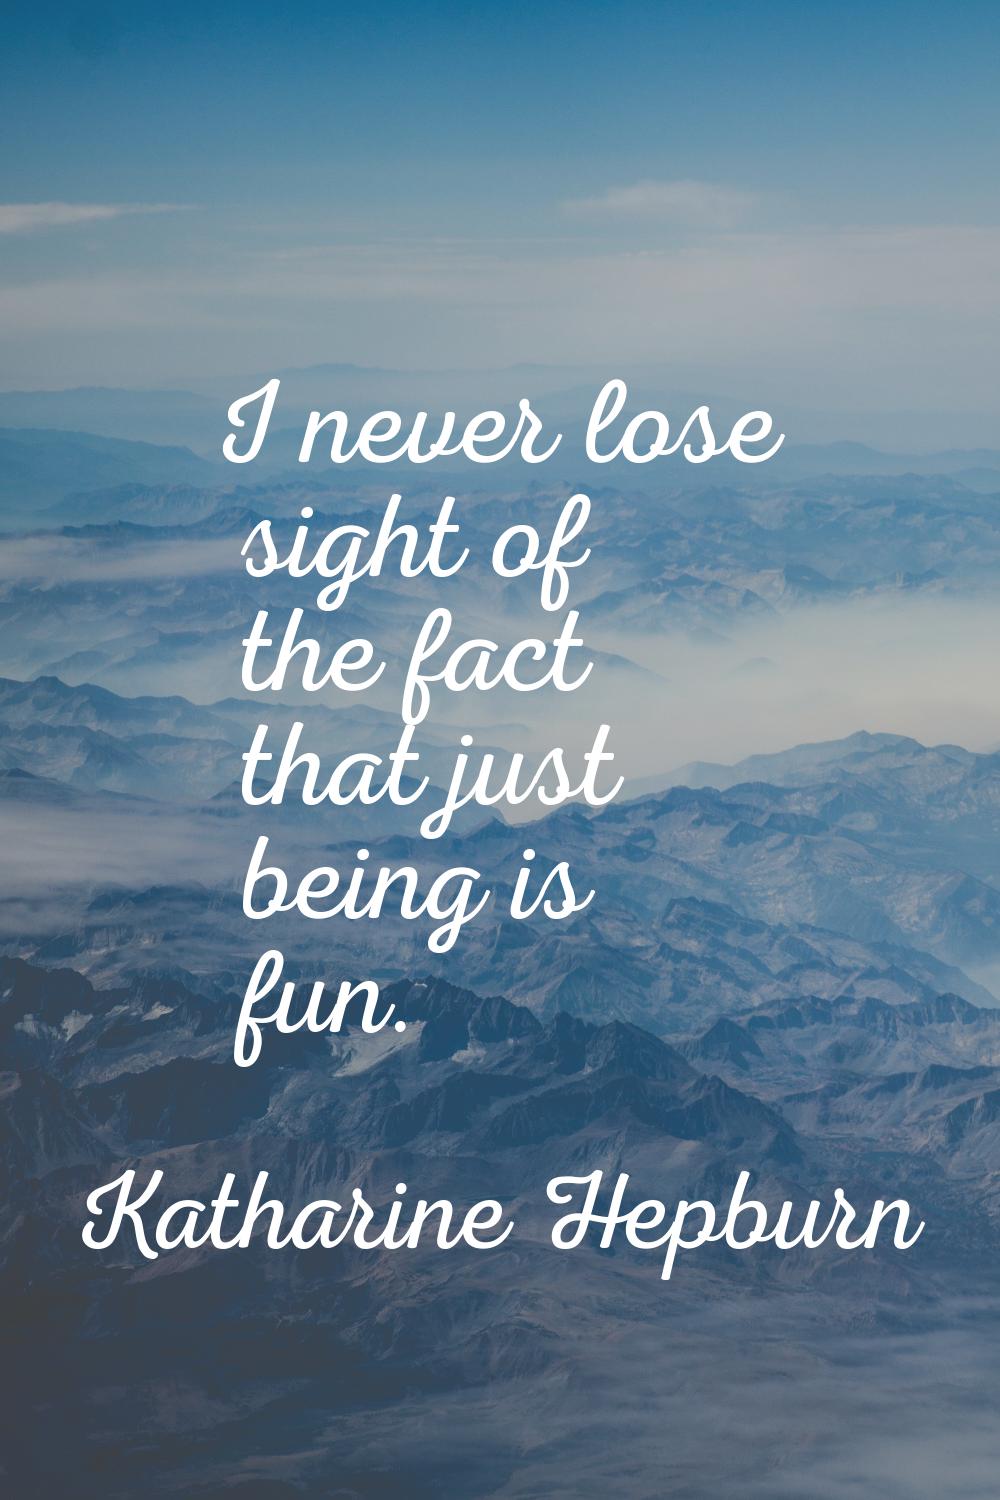 I never lose sight of the fact that just being is fun.